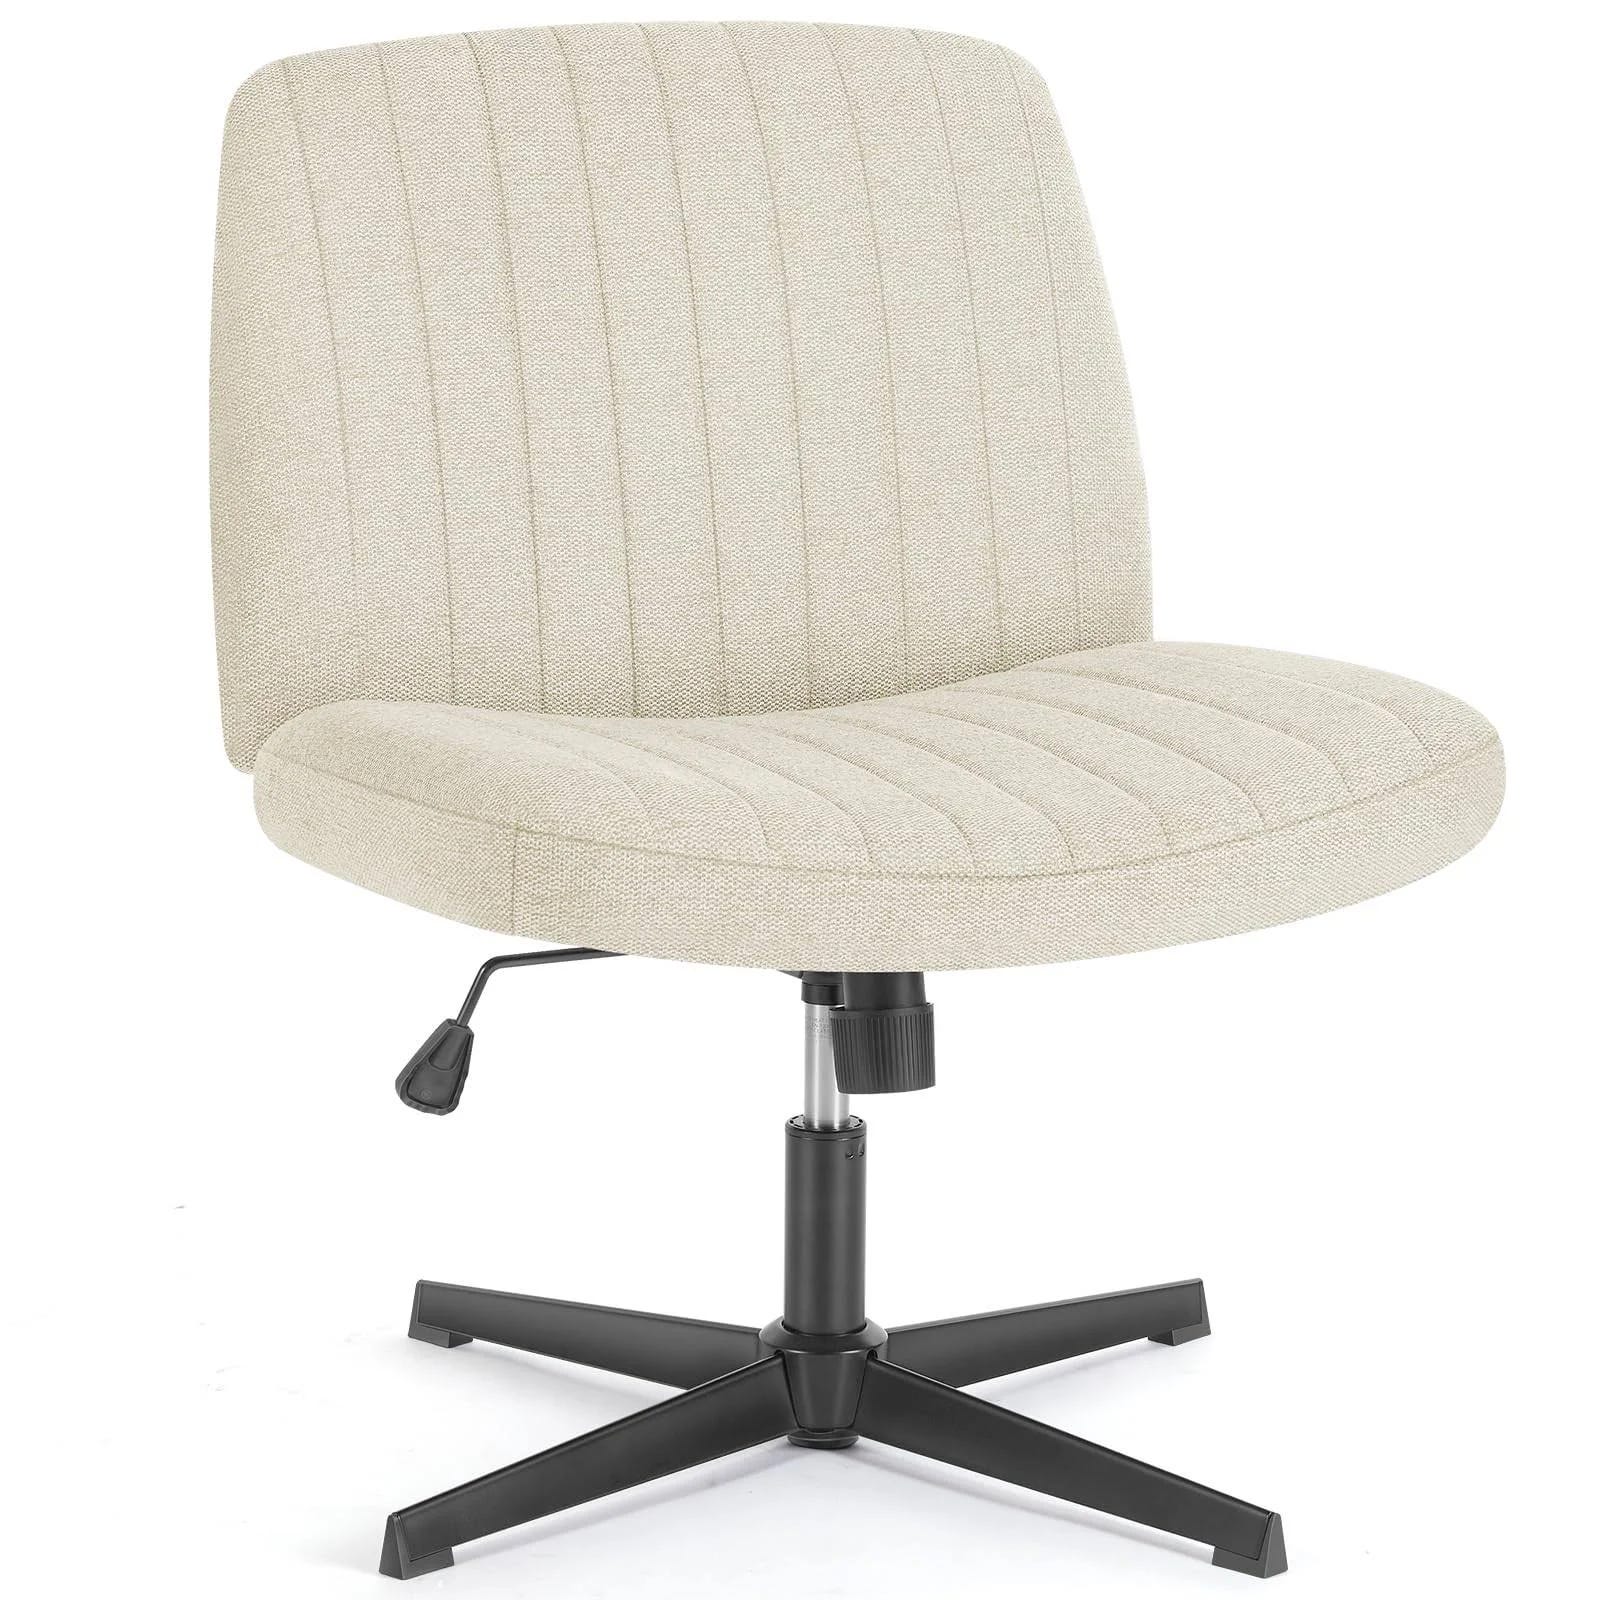 No Wheels, Swivel Criss Cross Office Chair for Small Spaces | Image